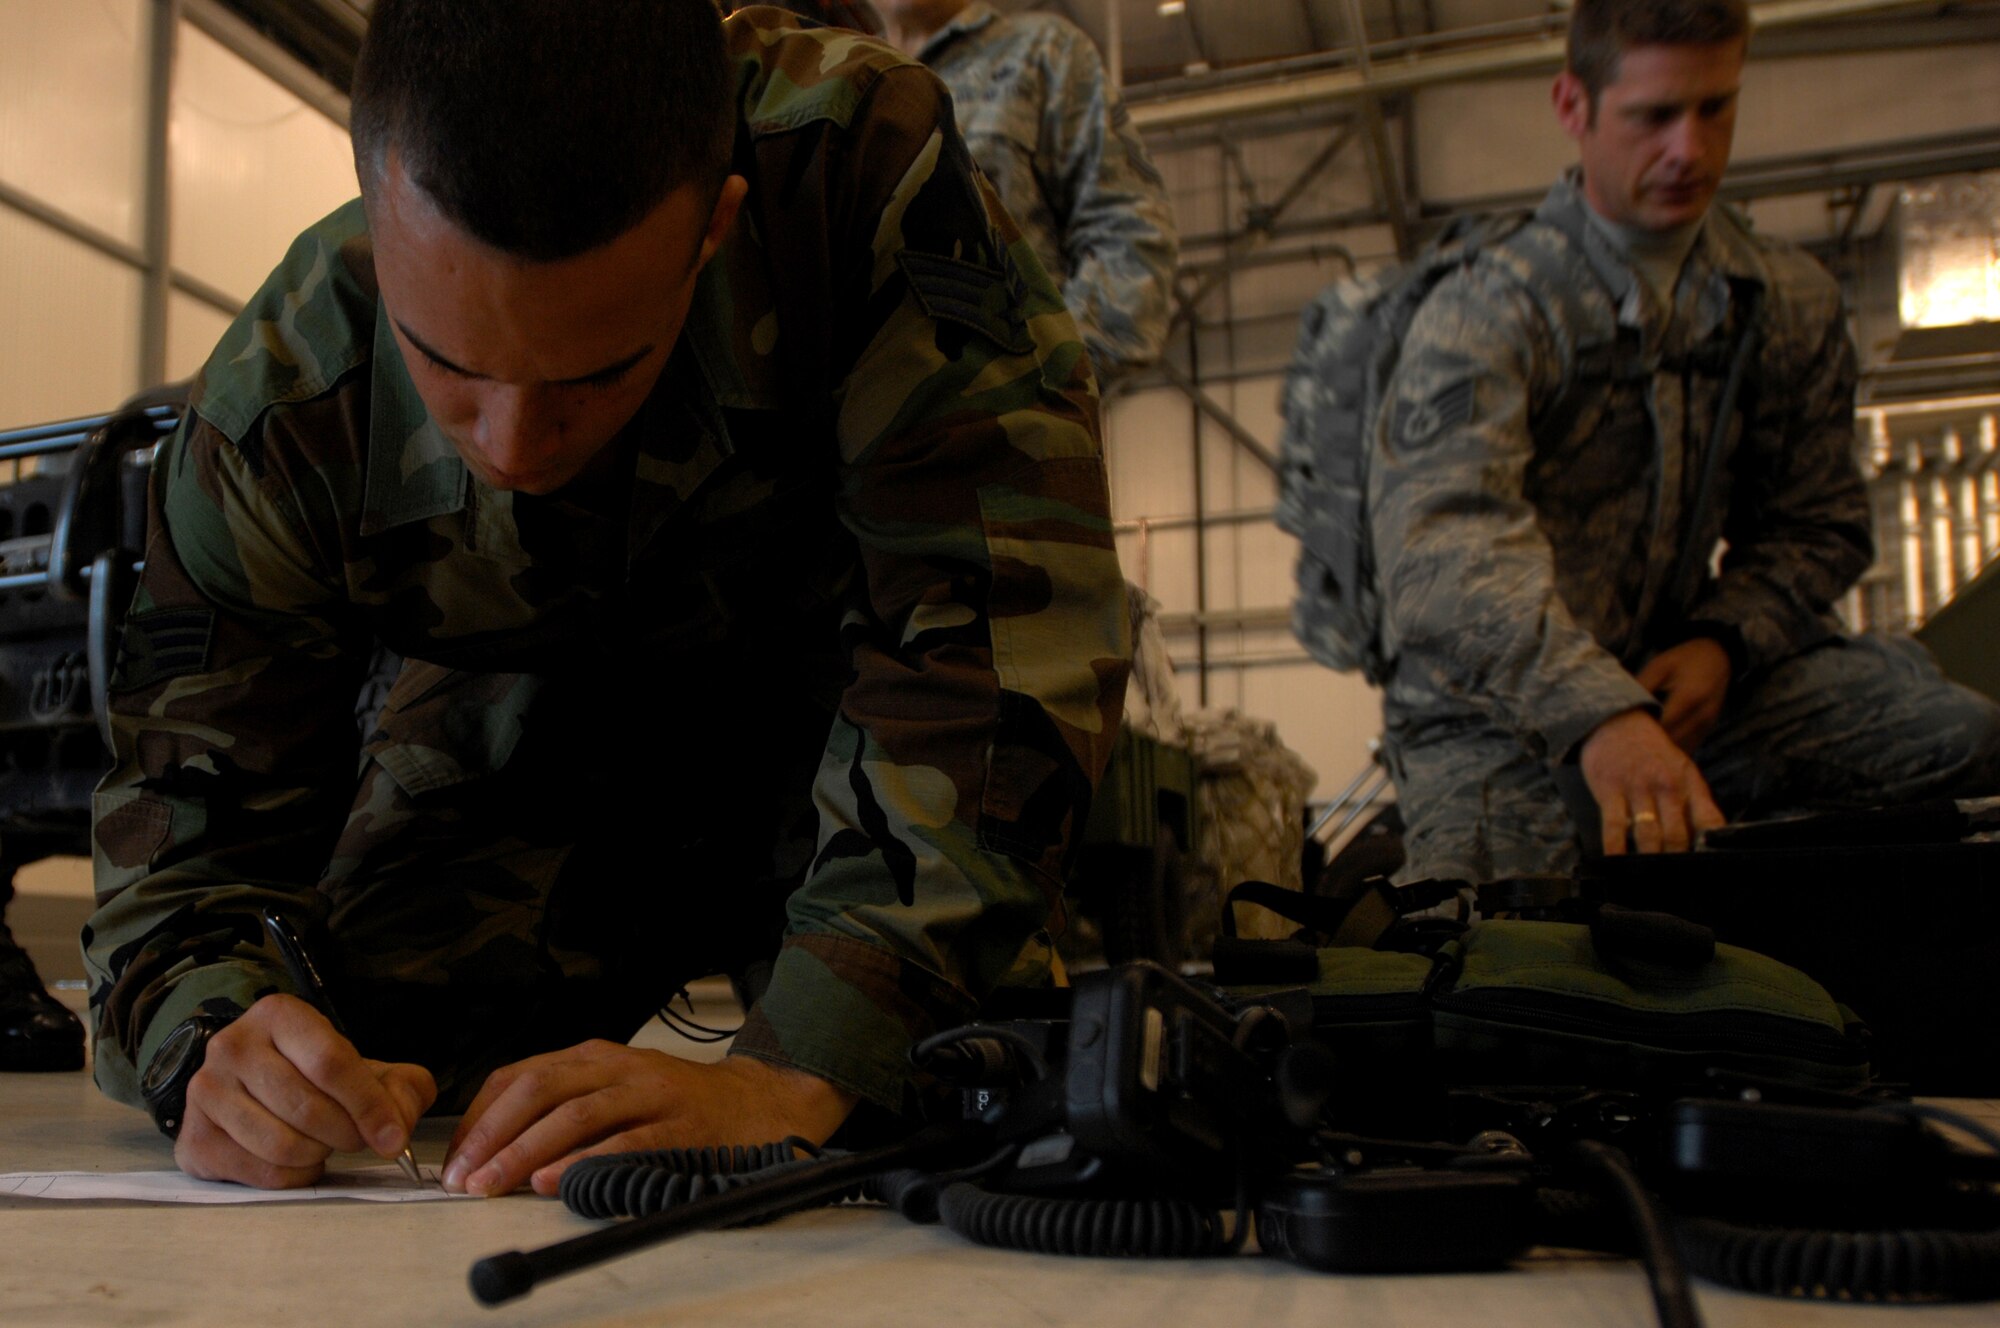 United States Air Force Senior Airman Nick Hurst, 786th Security Forces Squadron patrolman, fills out forms for additional radios in preparation for an Operational Readiness Exercise, May 17, 2009, RAF Fairford, England. Airman Hurst and his team participated in the ORE for seven days between West Freugh Airfield, Scotland and RAF Fairford, England on how to safely and effectively take over an airfield and set it up for operational capabilities. (U.S. Air Force photo by Senior Airman Kenny Holston)